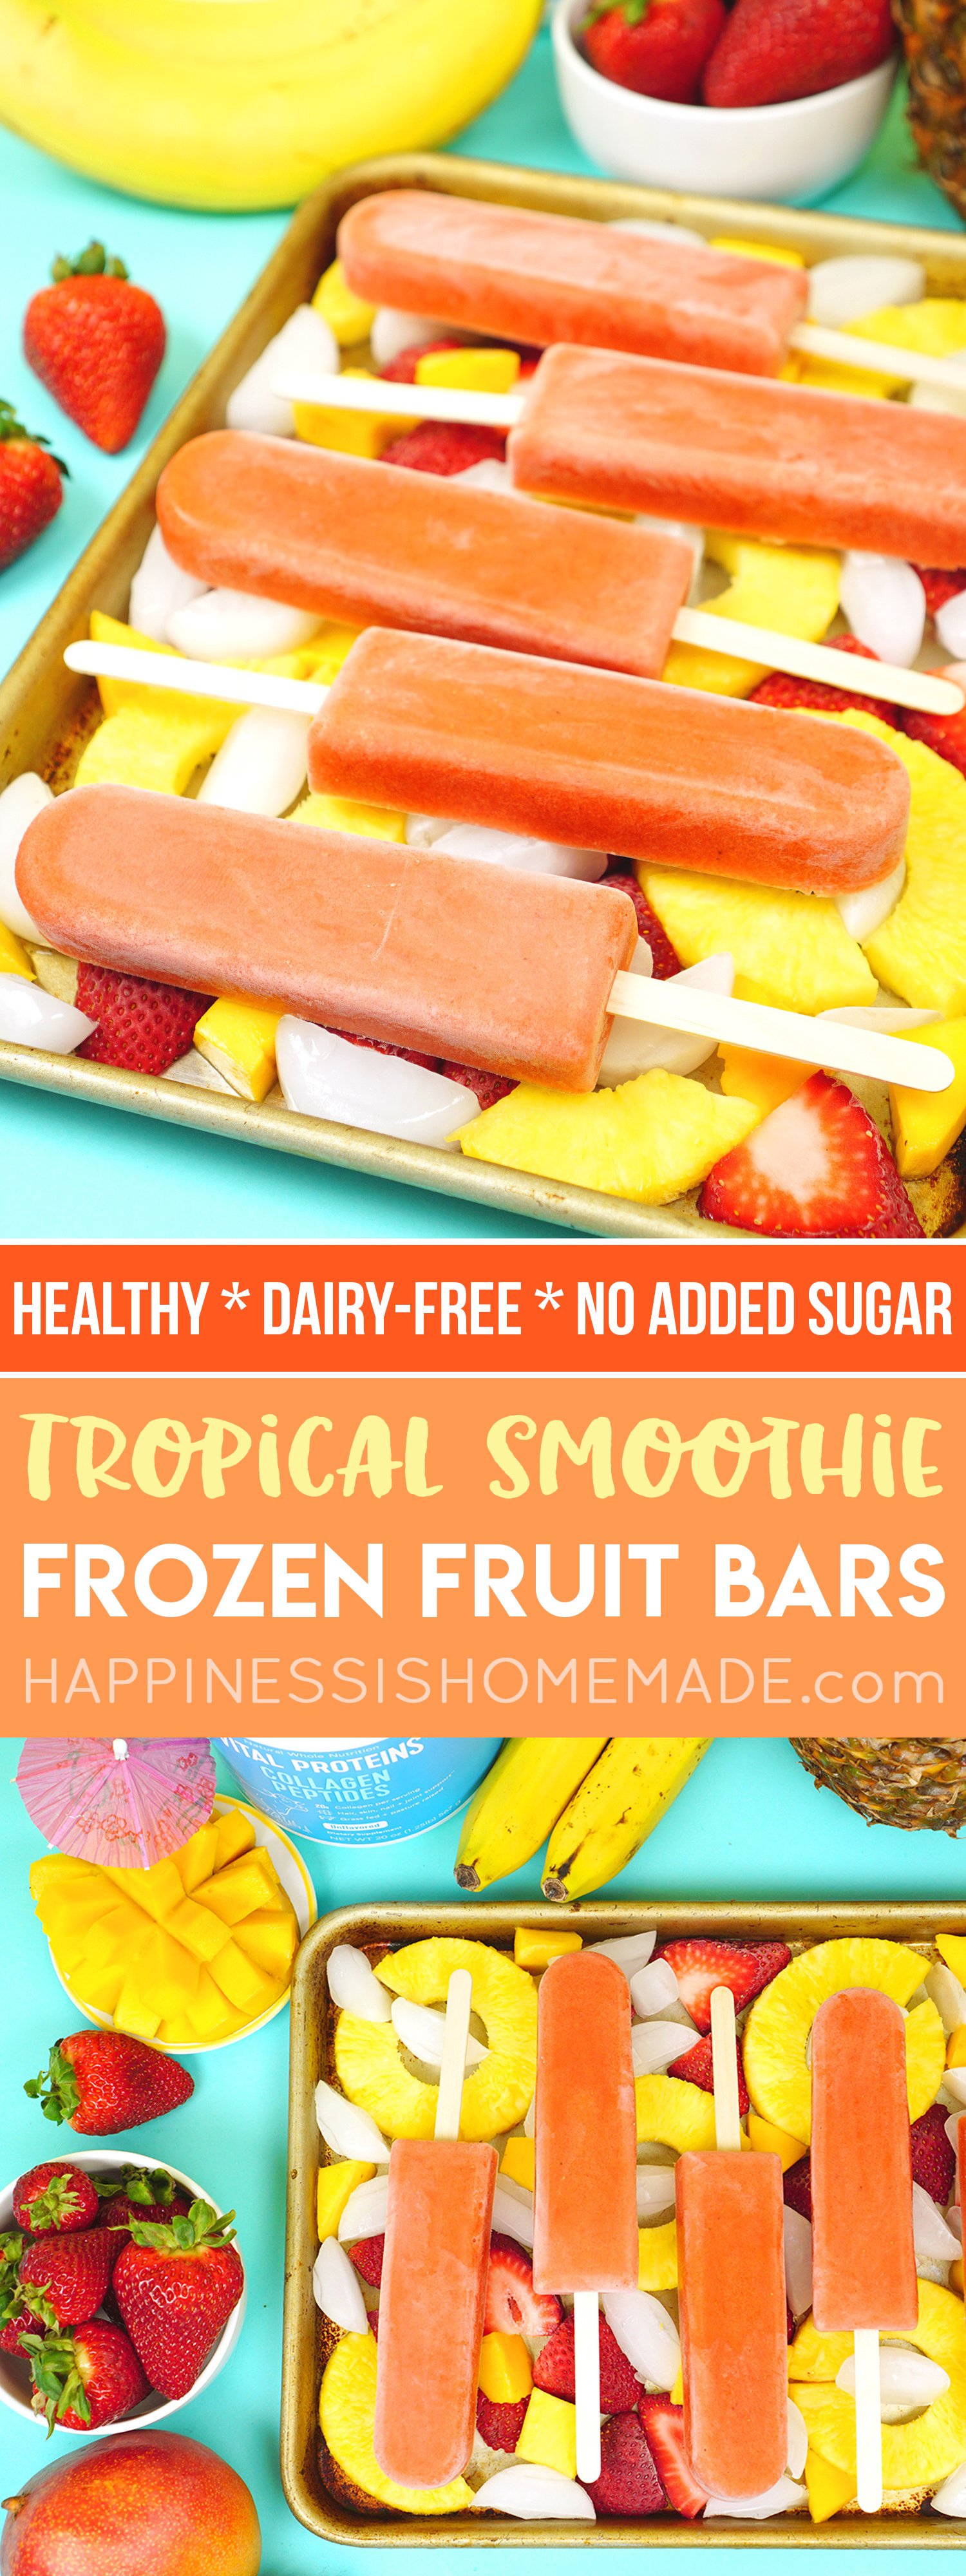 healthy dairy-free no added sugar tropical smoothie frozen fruit bars